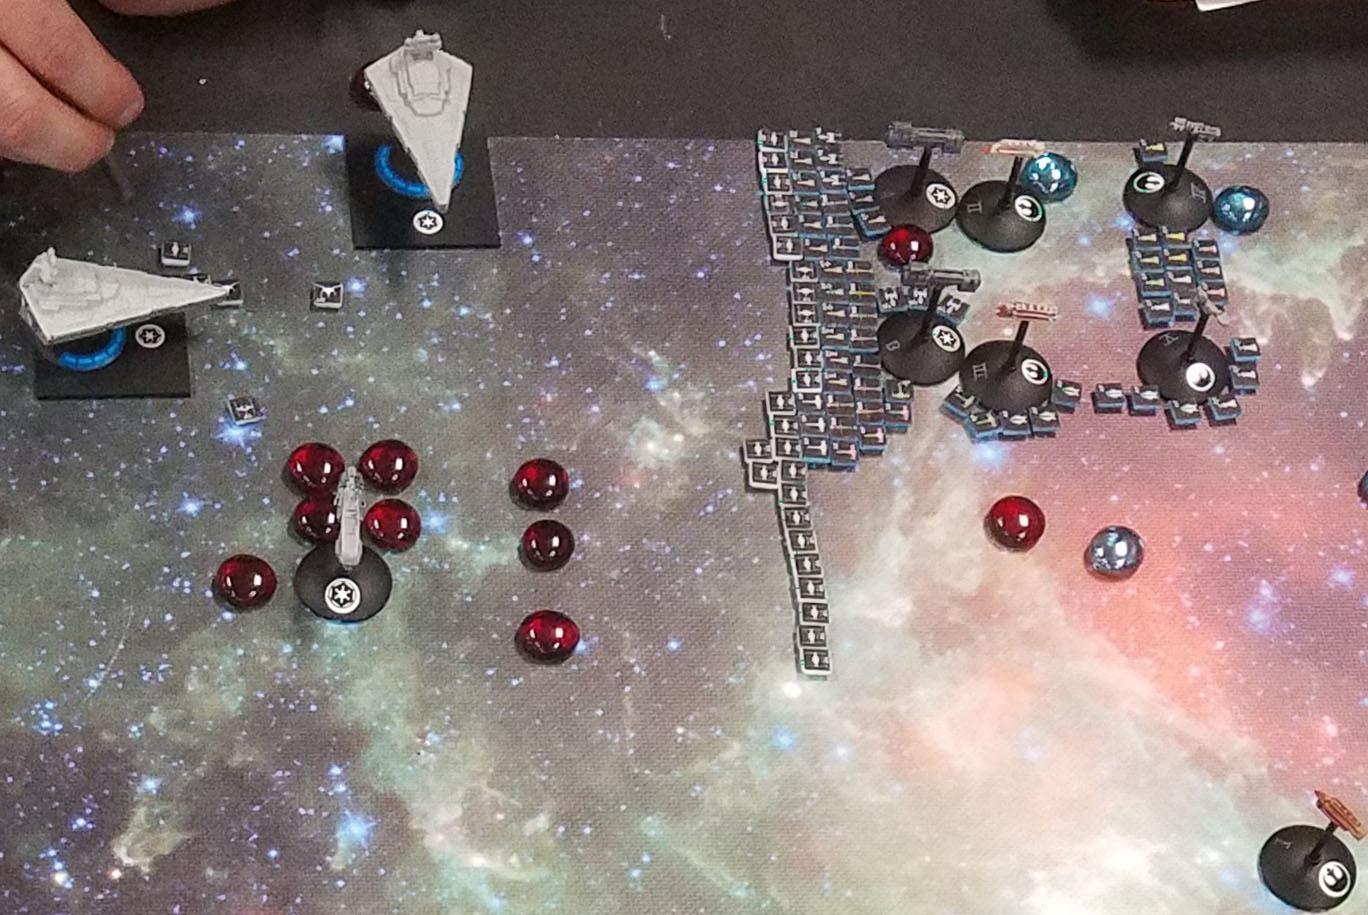 Battle, Campaign, Space Battle, Space Game, Spaceships, Star Wars, Starwars, Tabletop